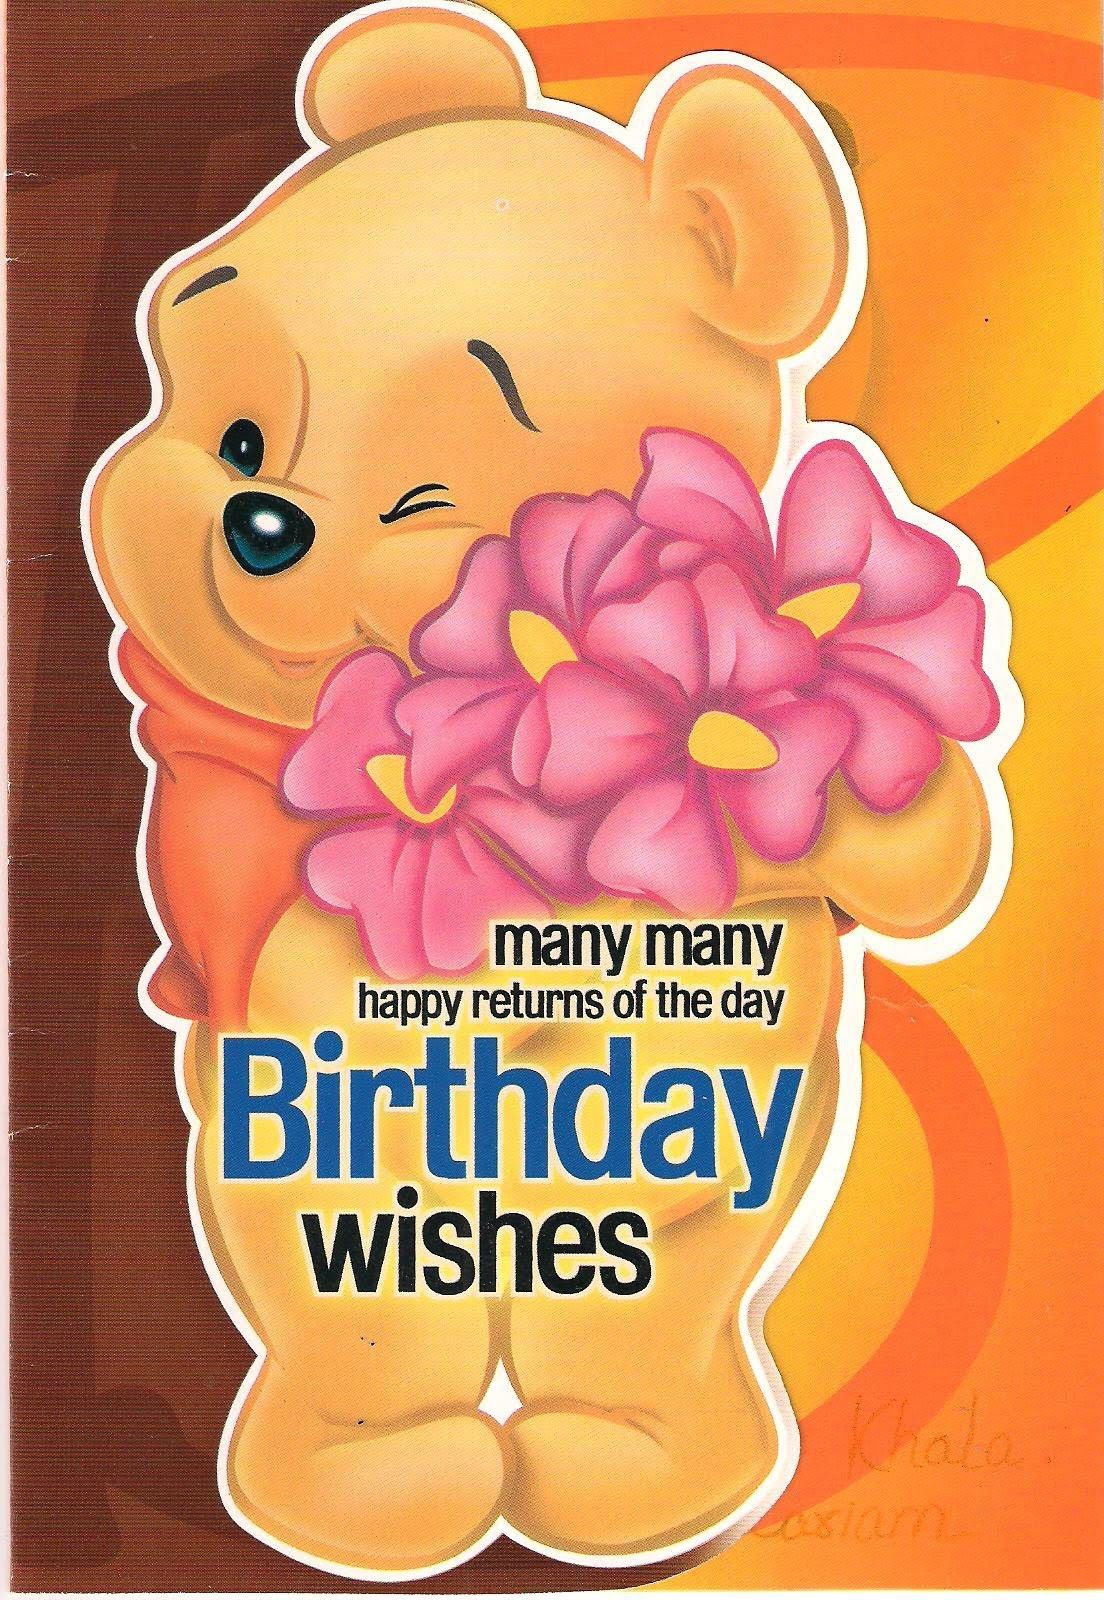 Happy Birthday Message Wallpaper Many Many Happy Returns Of The Day HD Wallpaper